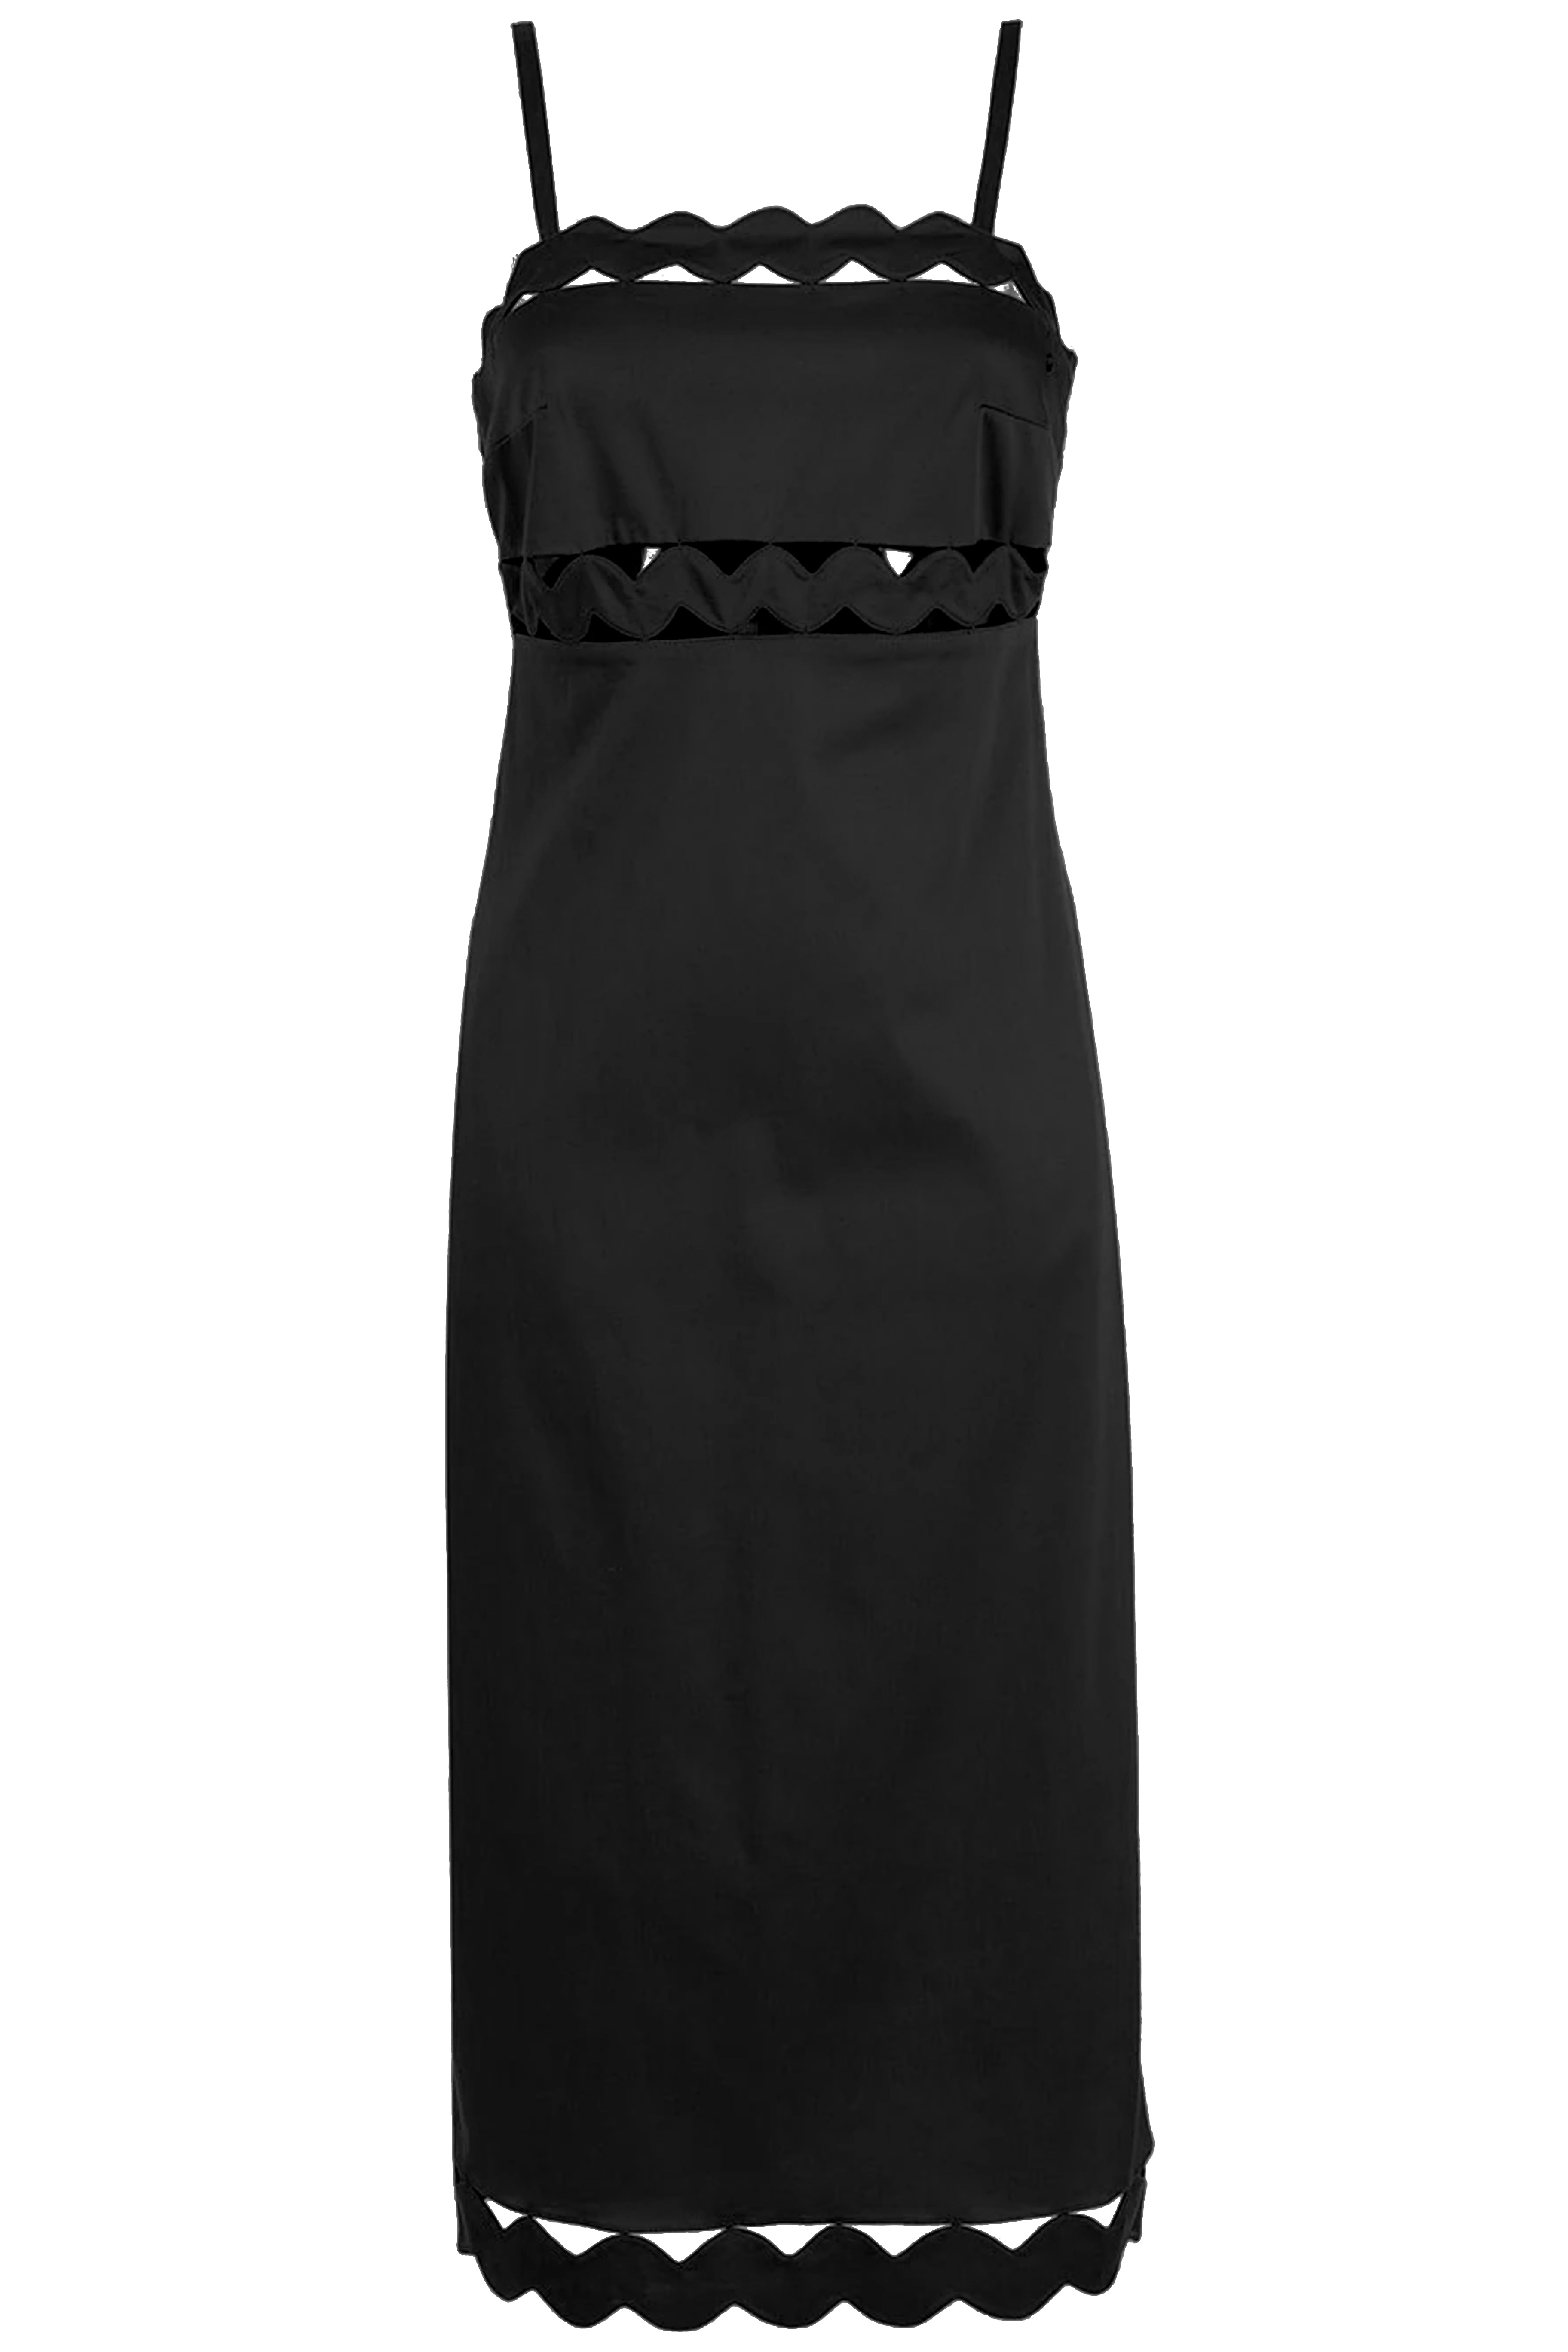 Moves Black Midi Dress With Straps Product